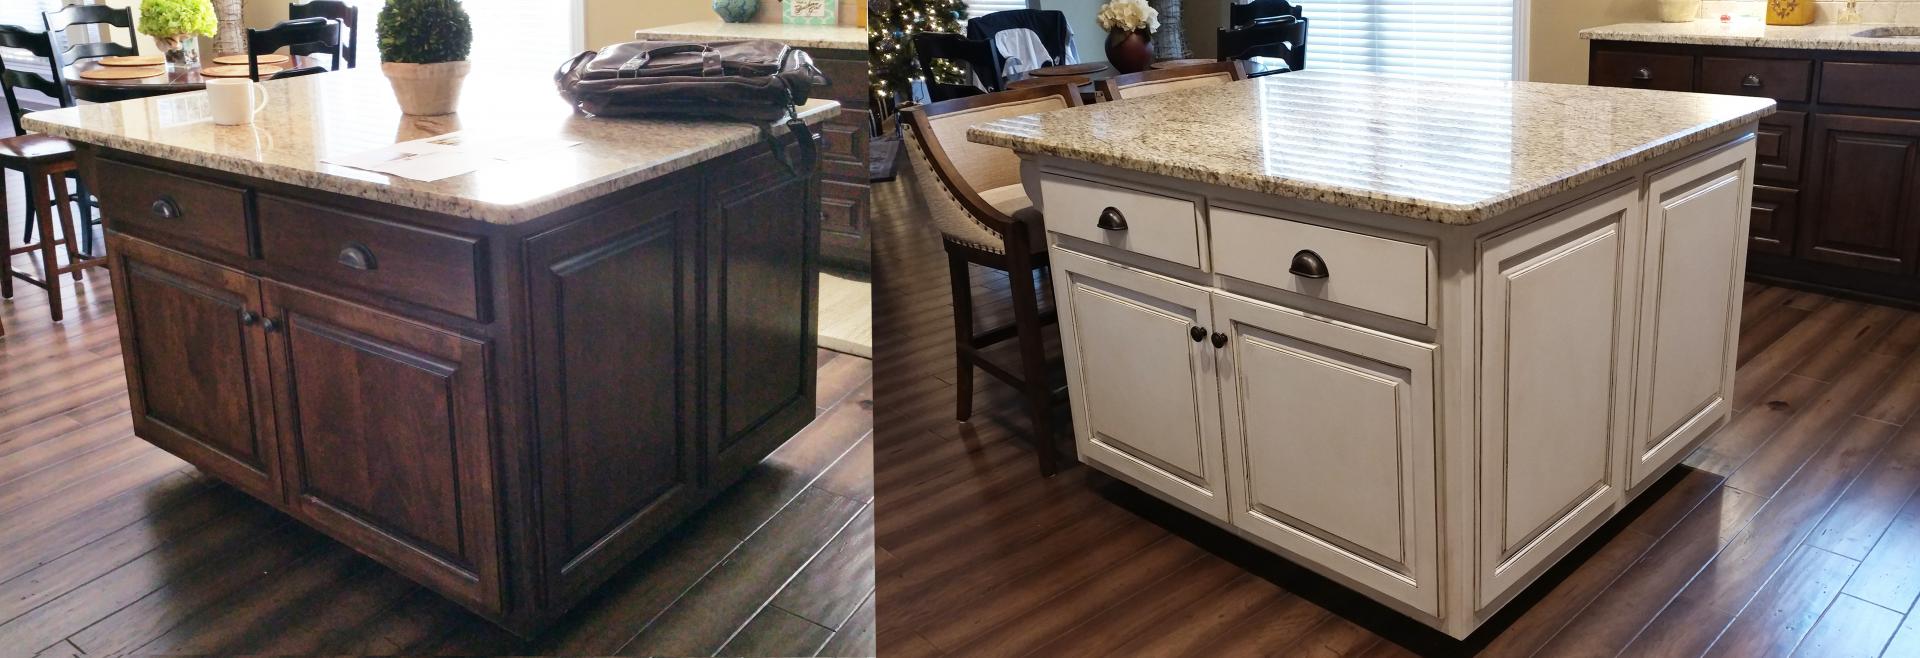 Before and After Faux European finish  in a warm modern Tuscan glaze look.